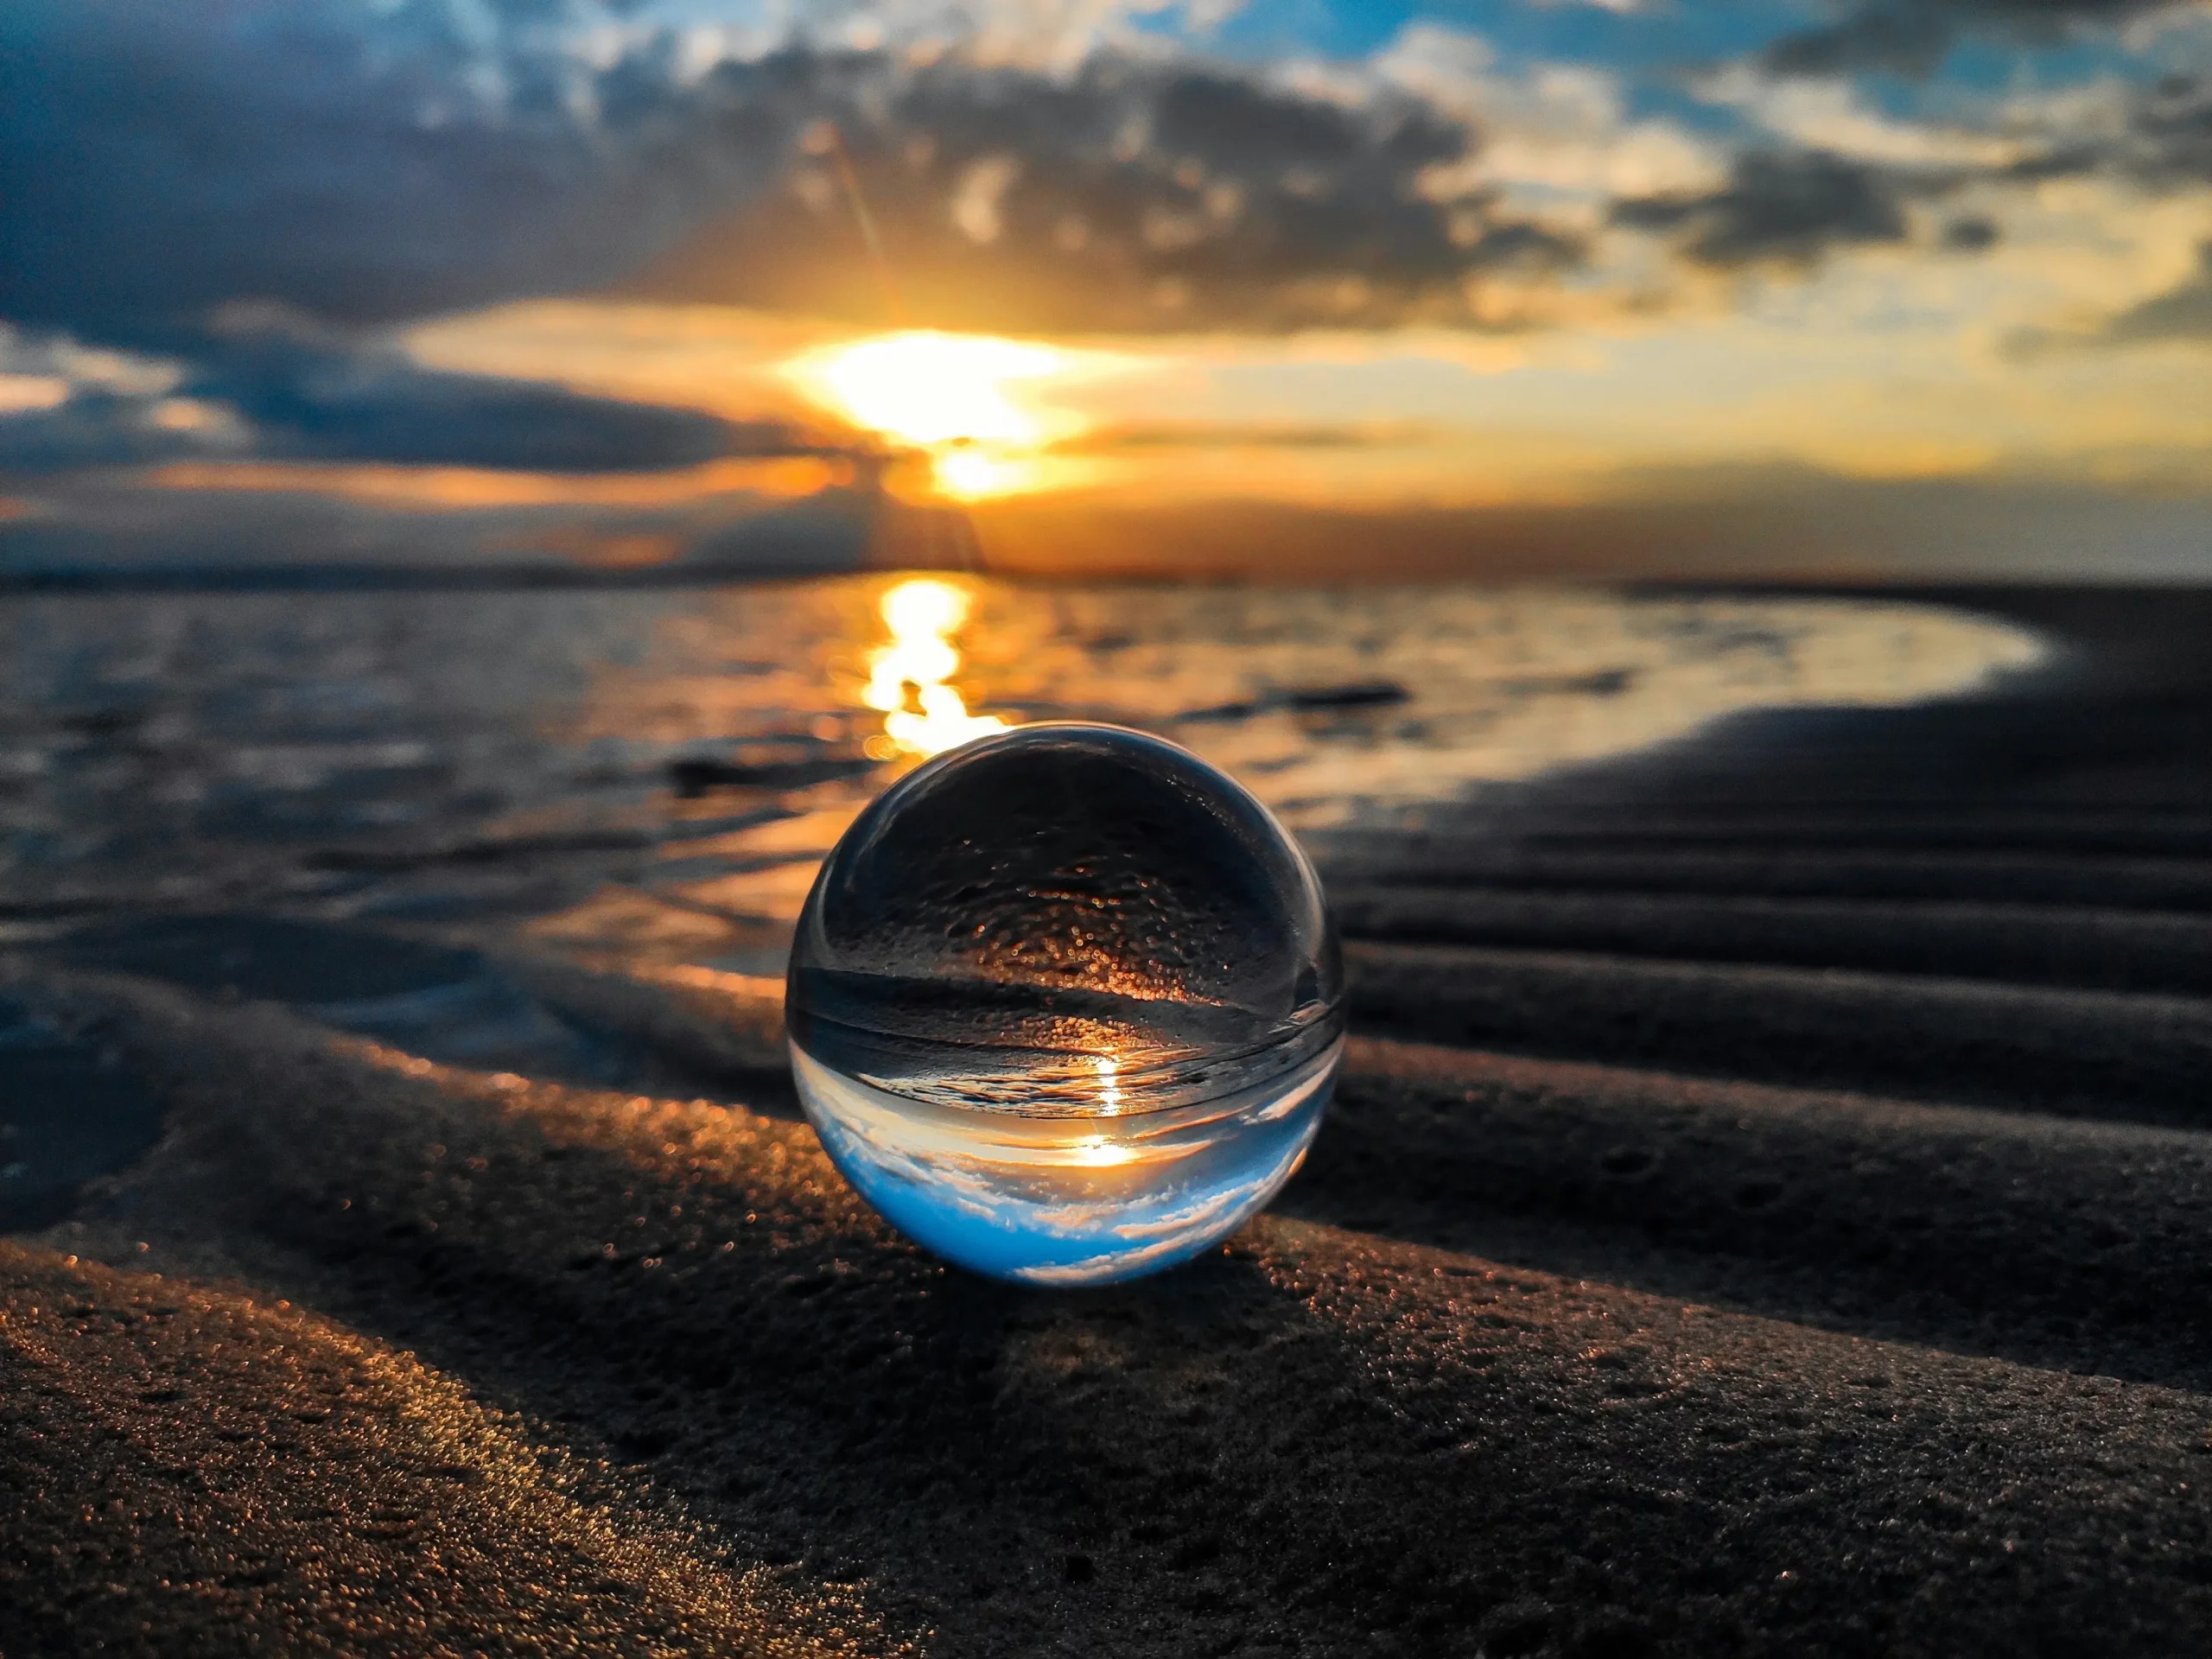 A glass ball reflecting the vibrant colors of a sunset on a serene beach.